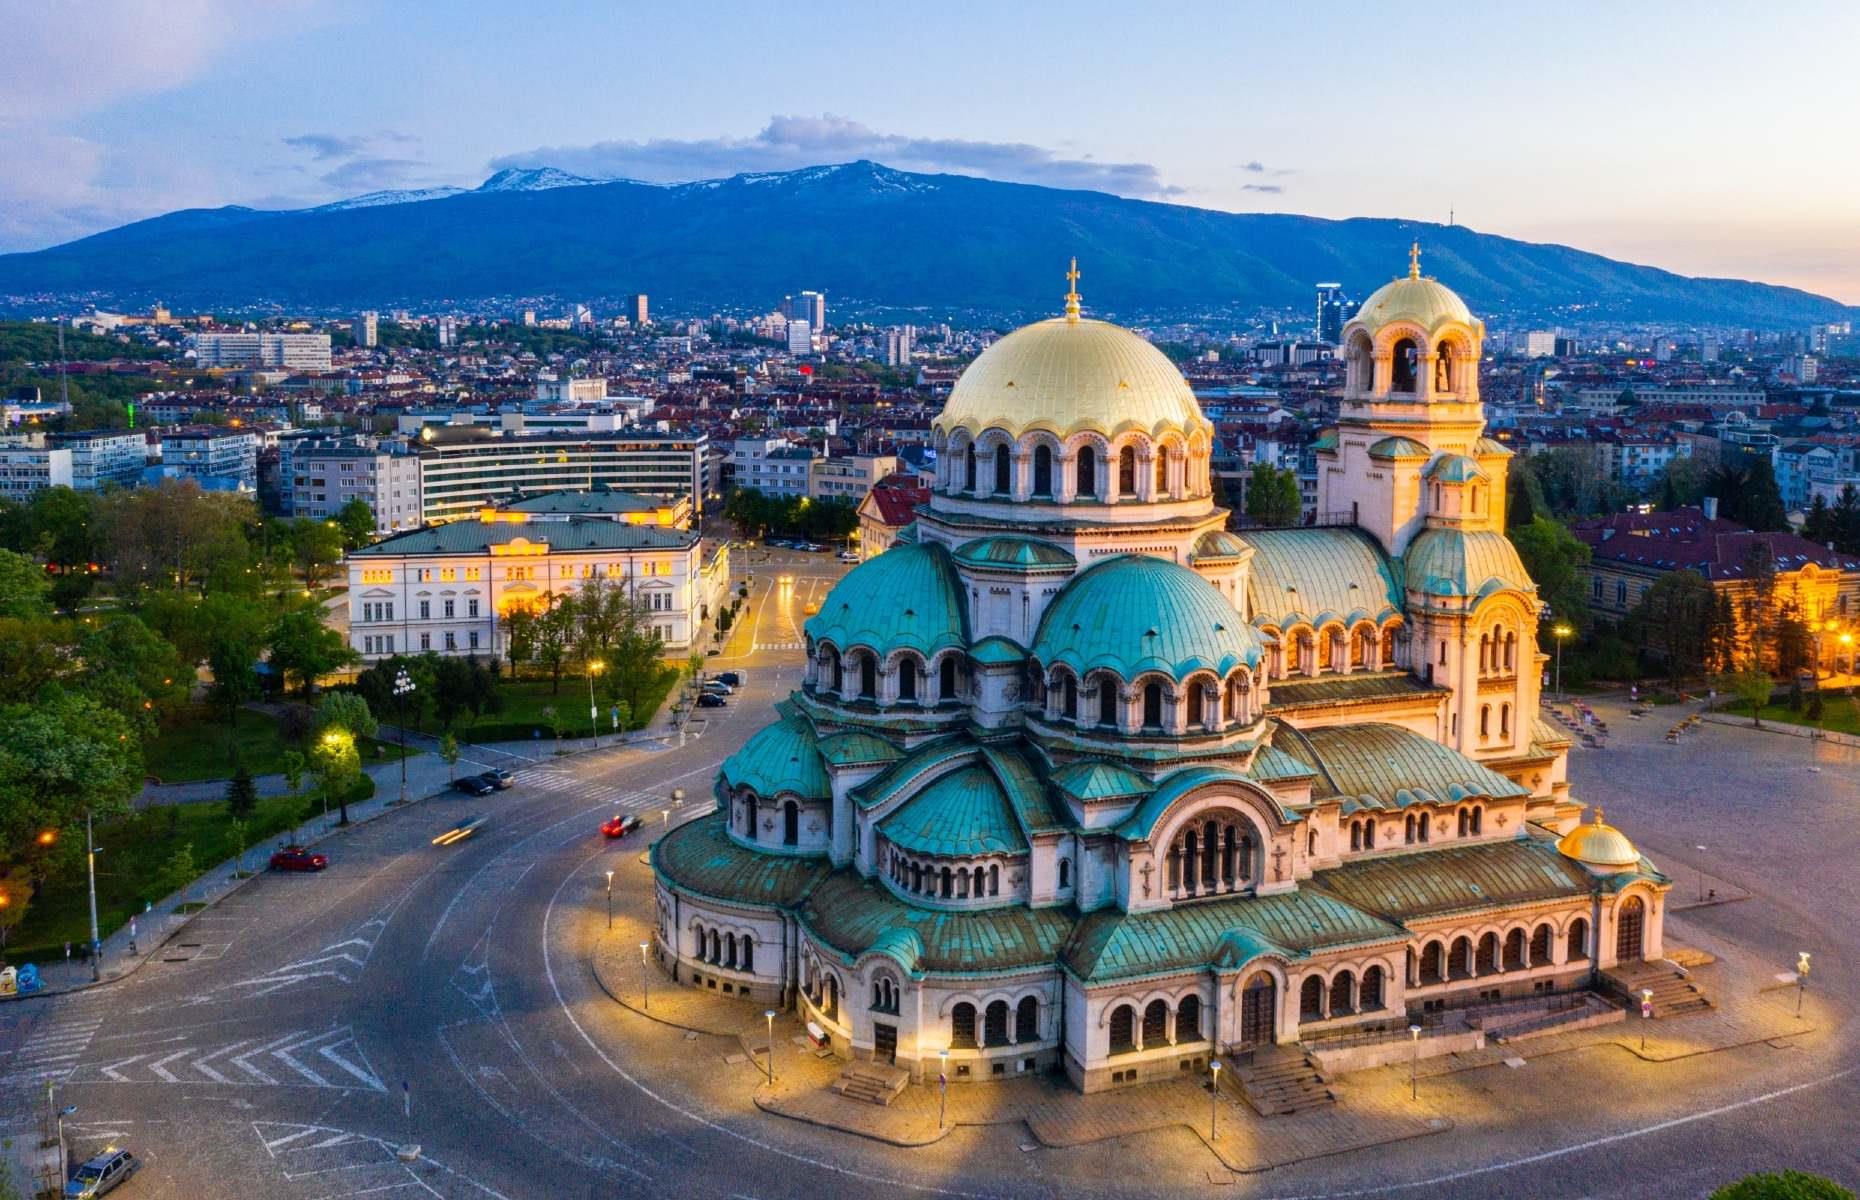 <p>While the term ‘cheap’ is subjective, we think most will agree that paying less than a euro for an espresso is an absolute steal – and almost unheard of. But that's the going rate in Bulgaria, an oft-overlooked nation at the confluence of the Black Sea and the Balkan Peninsula's highest peaks.</p>  <p>Its neighbor Romania is also touted as one of Europe's more affordable destinations, as well as the likes of Estonia, Poland, and Czechia.</p>